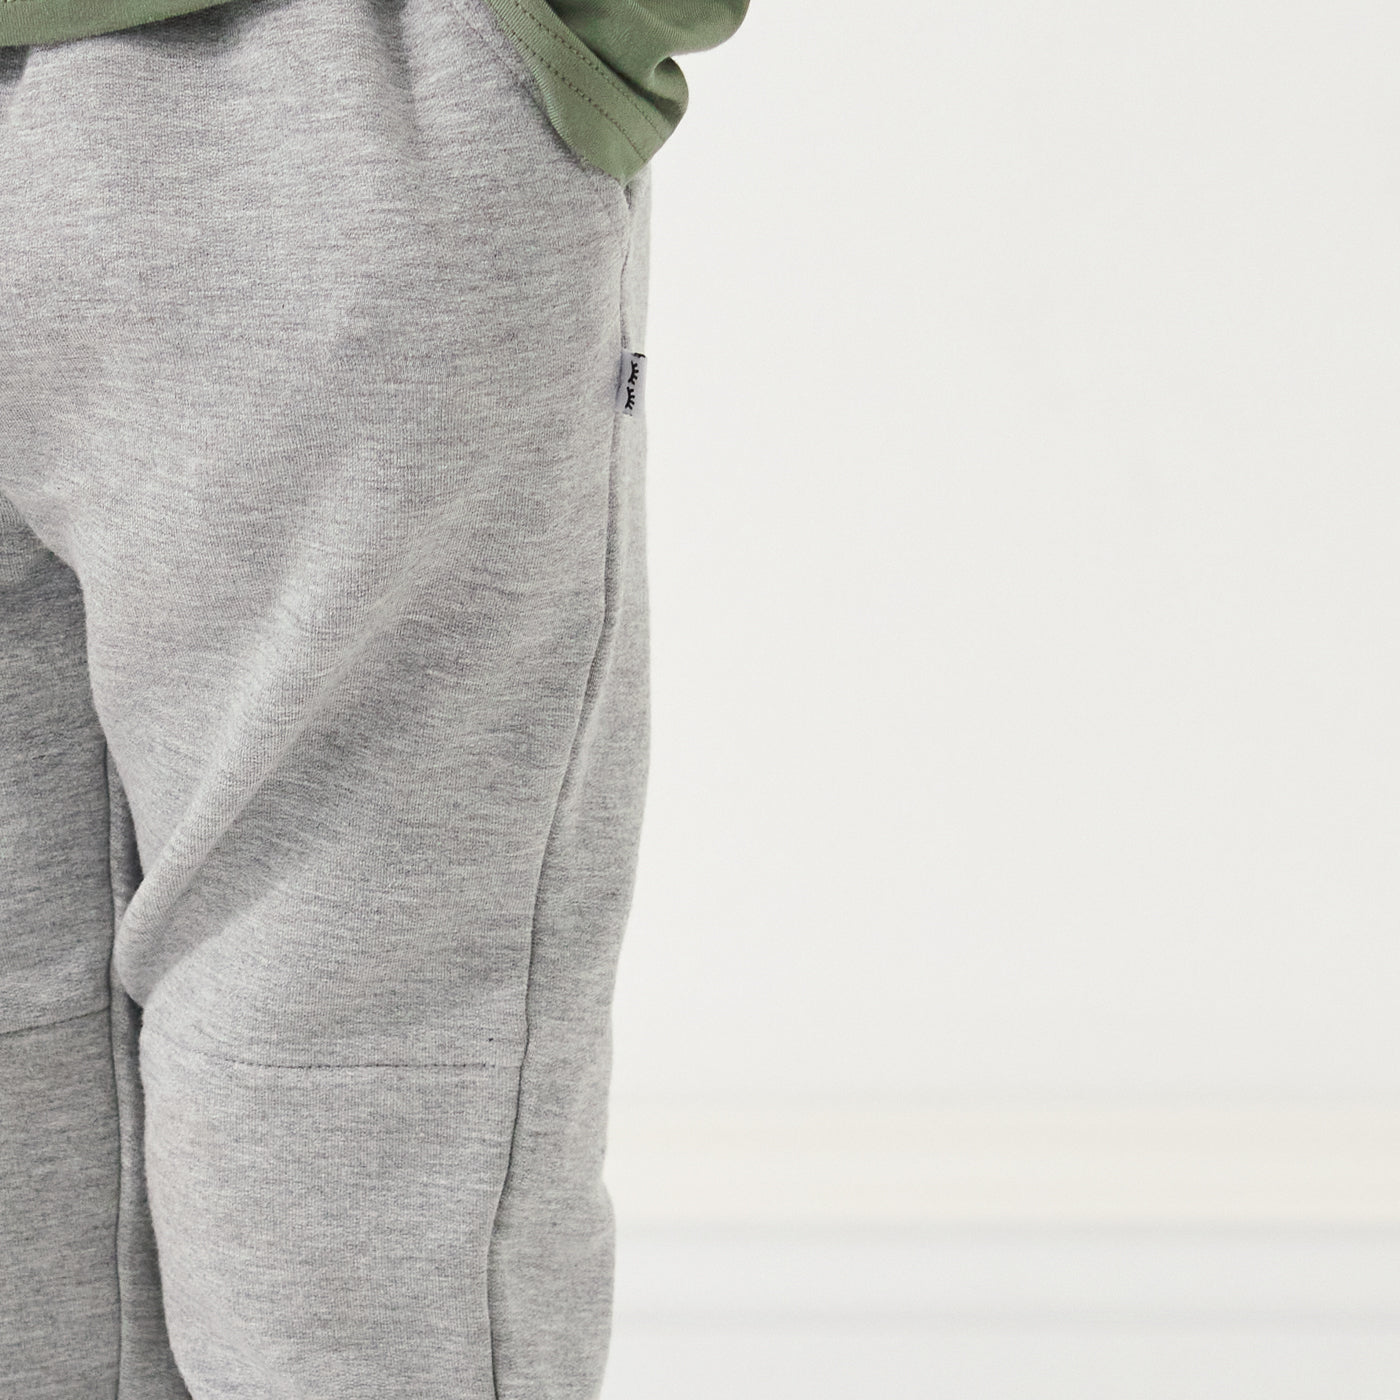 Close up image of the pockets and side hem of the Heather Gray joggers